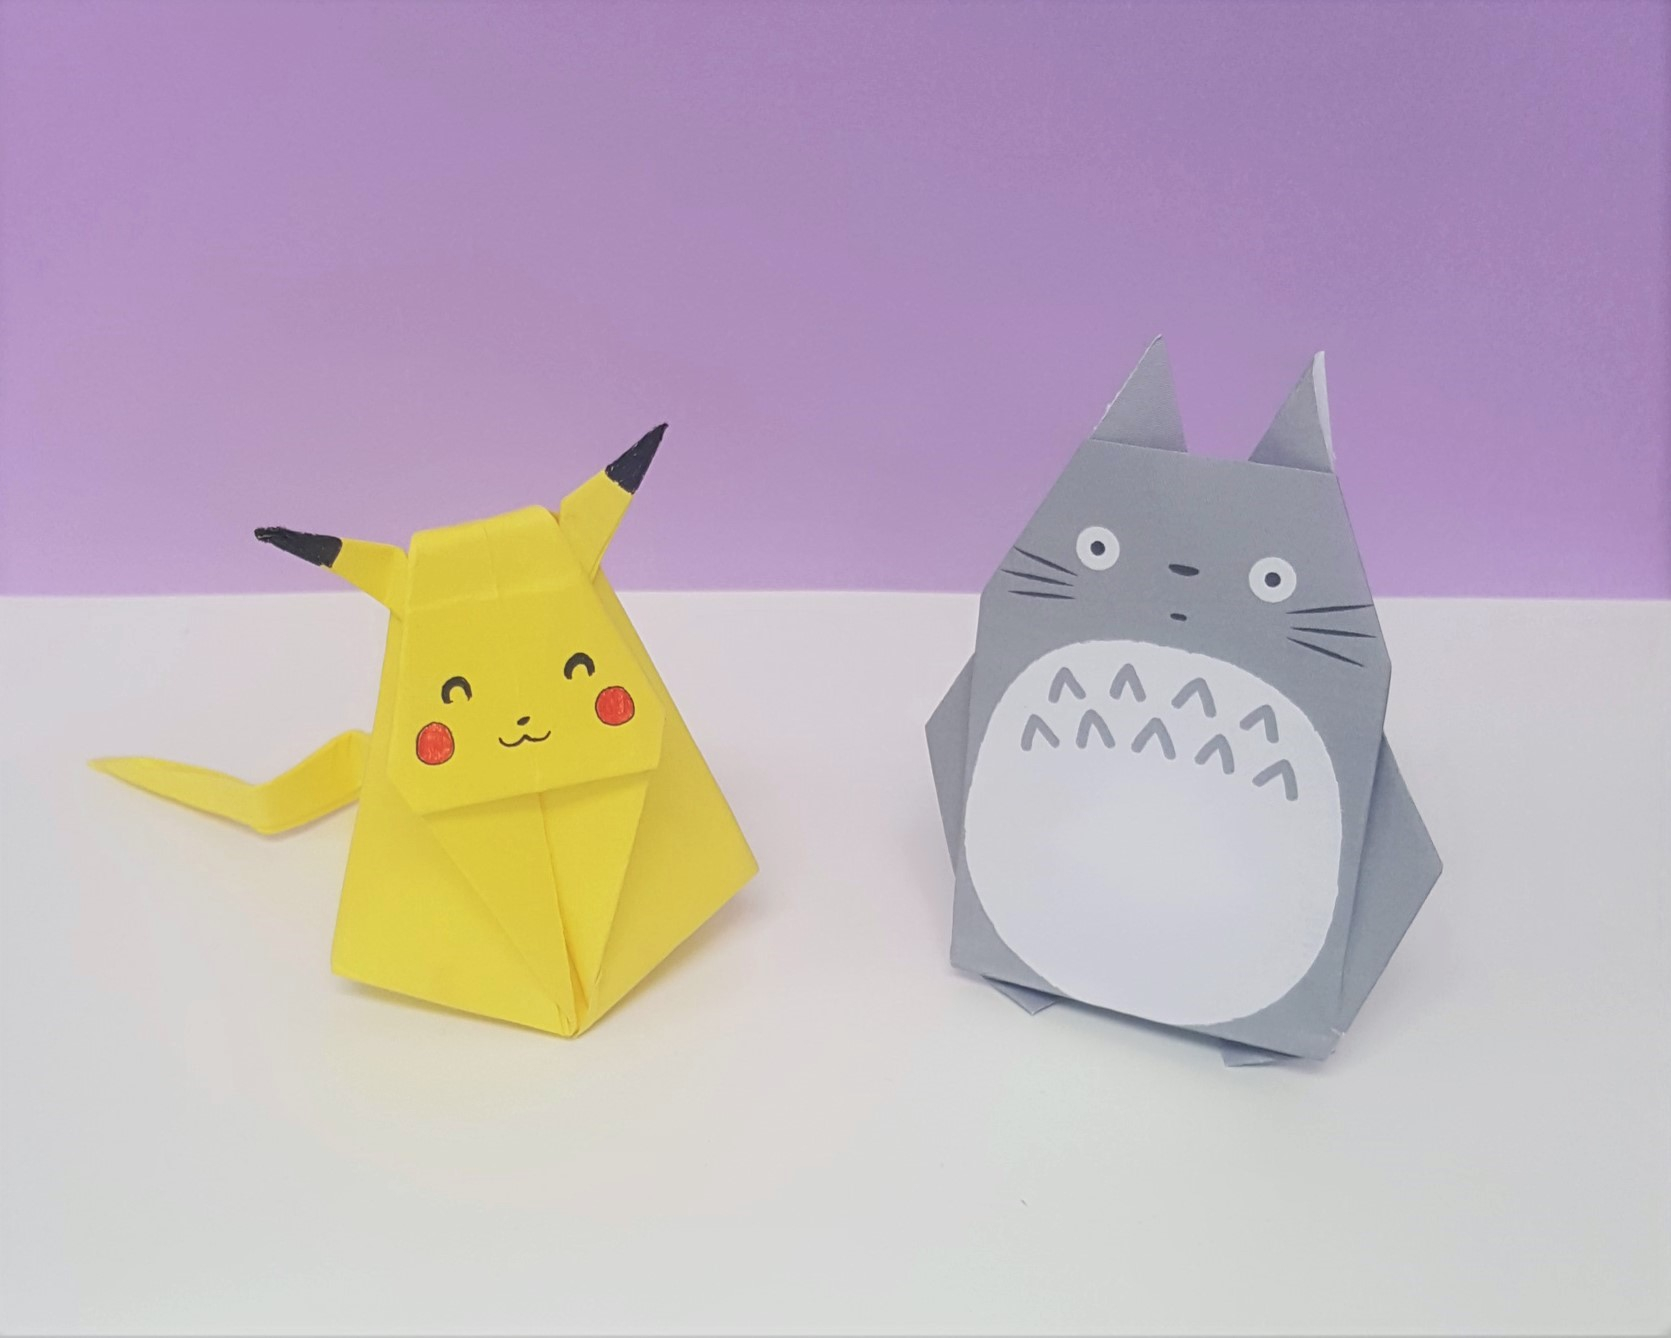 Paper Origami Designs Kawaii Japanese Character Origami Designs You Need To Try